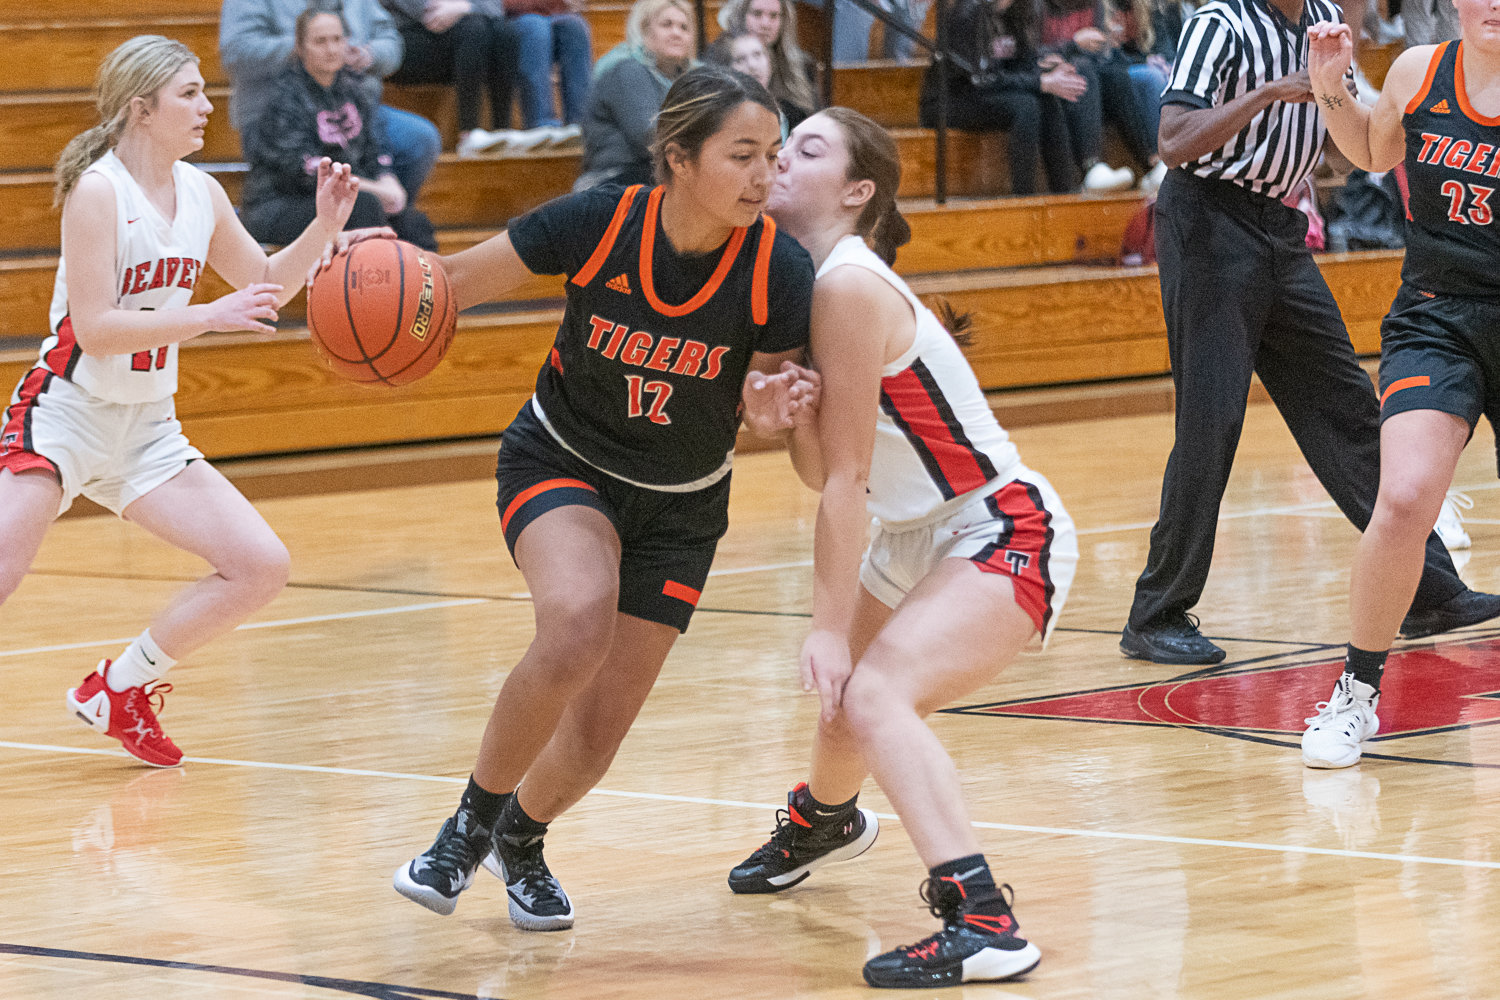 Centralia's Makayla Chavez dribbles around contact during the first quarter of the Tigers' 56-16 win at Tenino to open the season on Dec. 1.